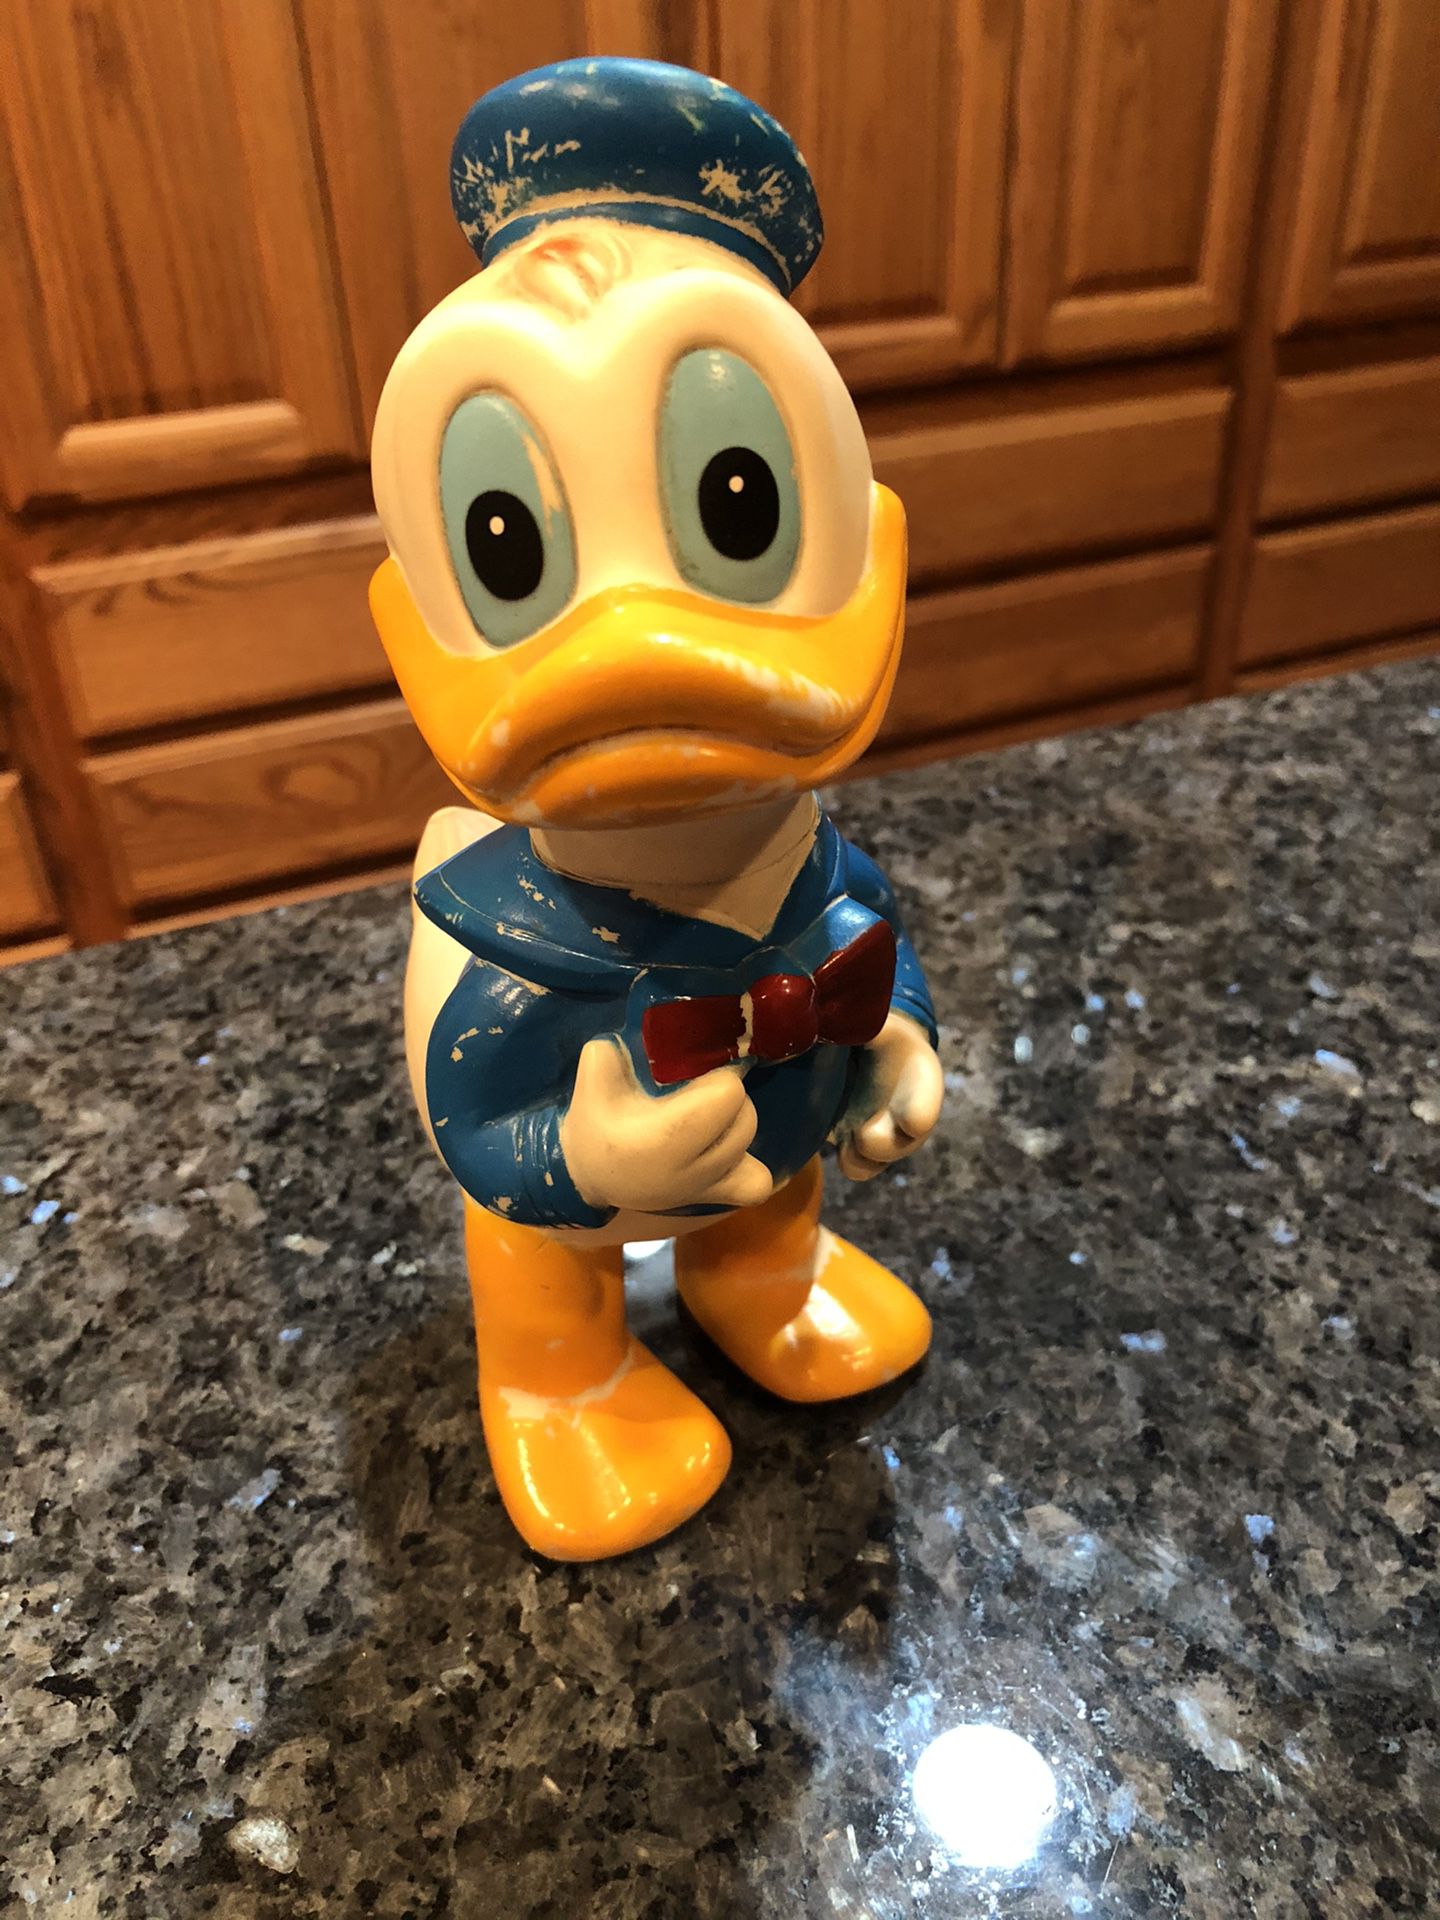 Vintage Walt Disney Productions Donald Duck Rubber Squeaky Toy Figurine Very old. Size 8 inches tall